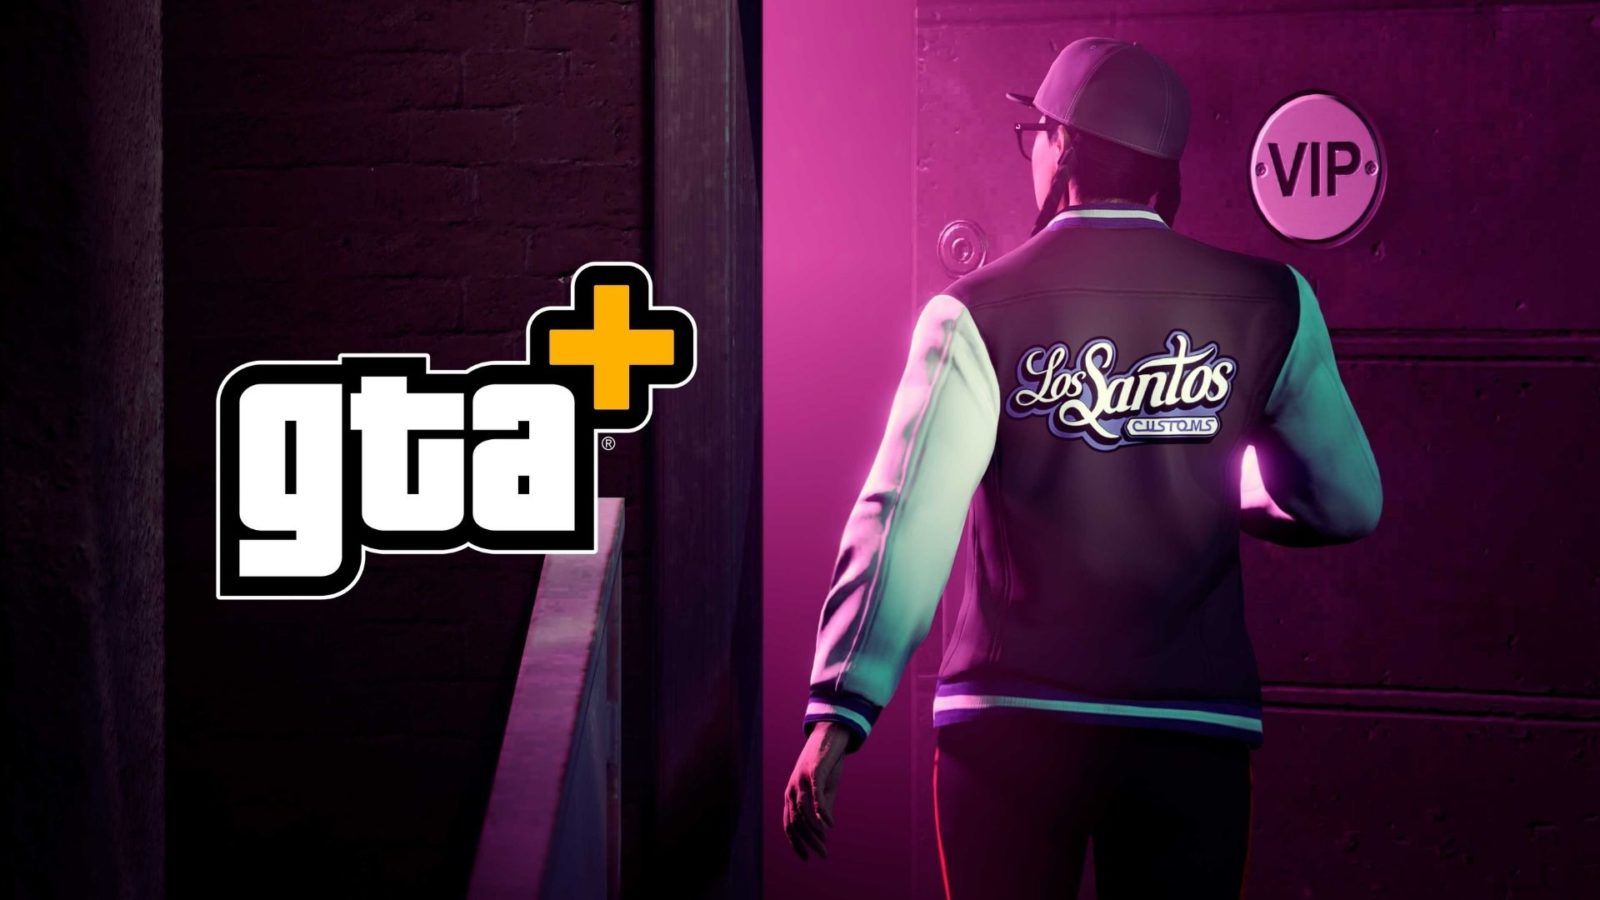 Rockstar Games launches a paid subscription for ‘GTA Online’ players